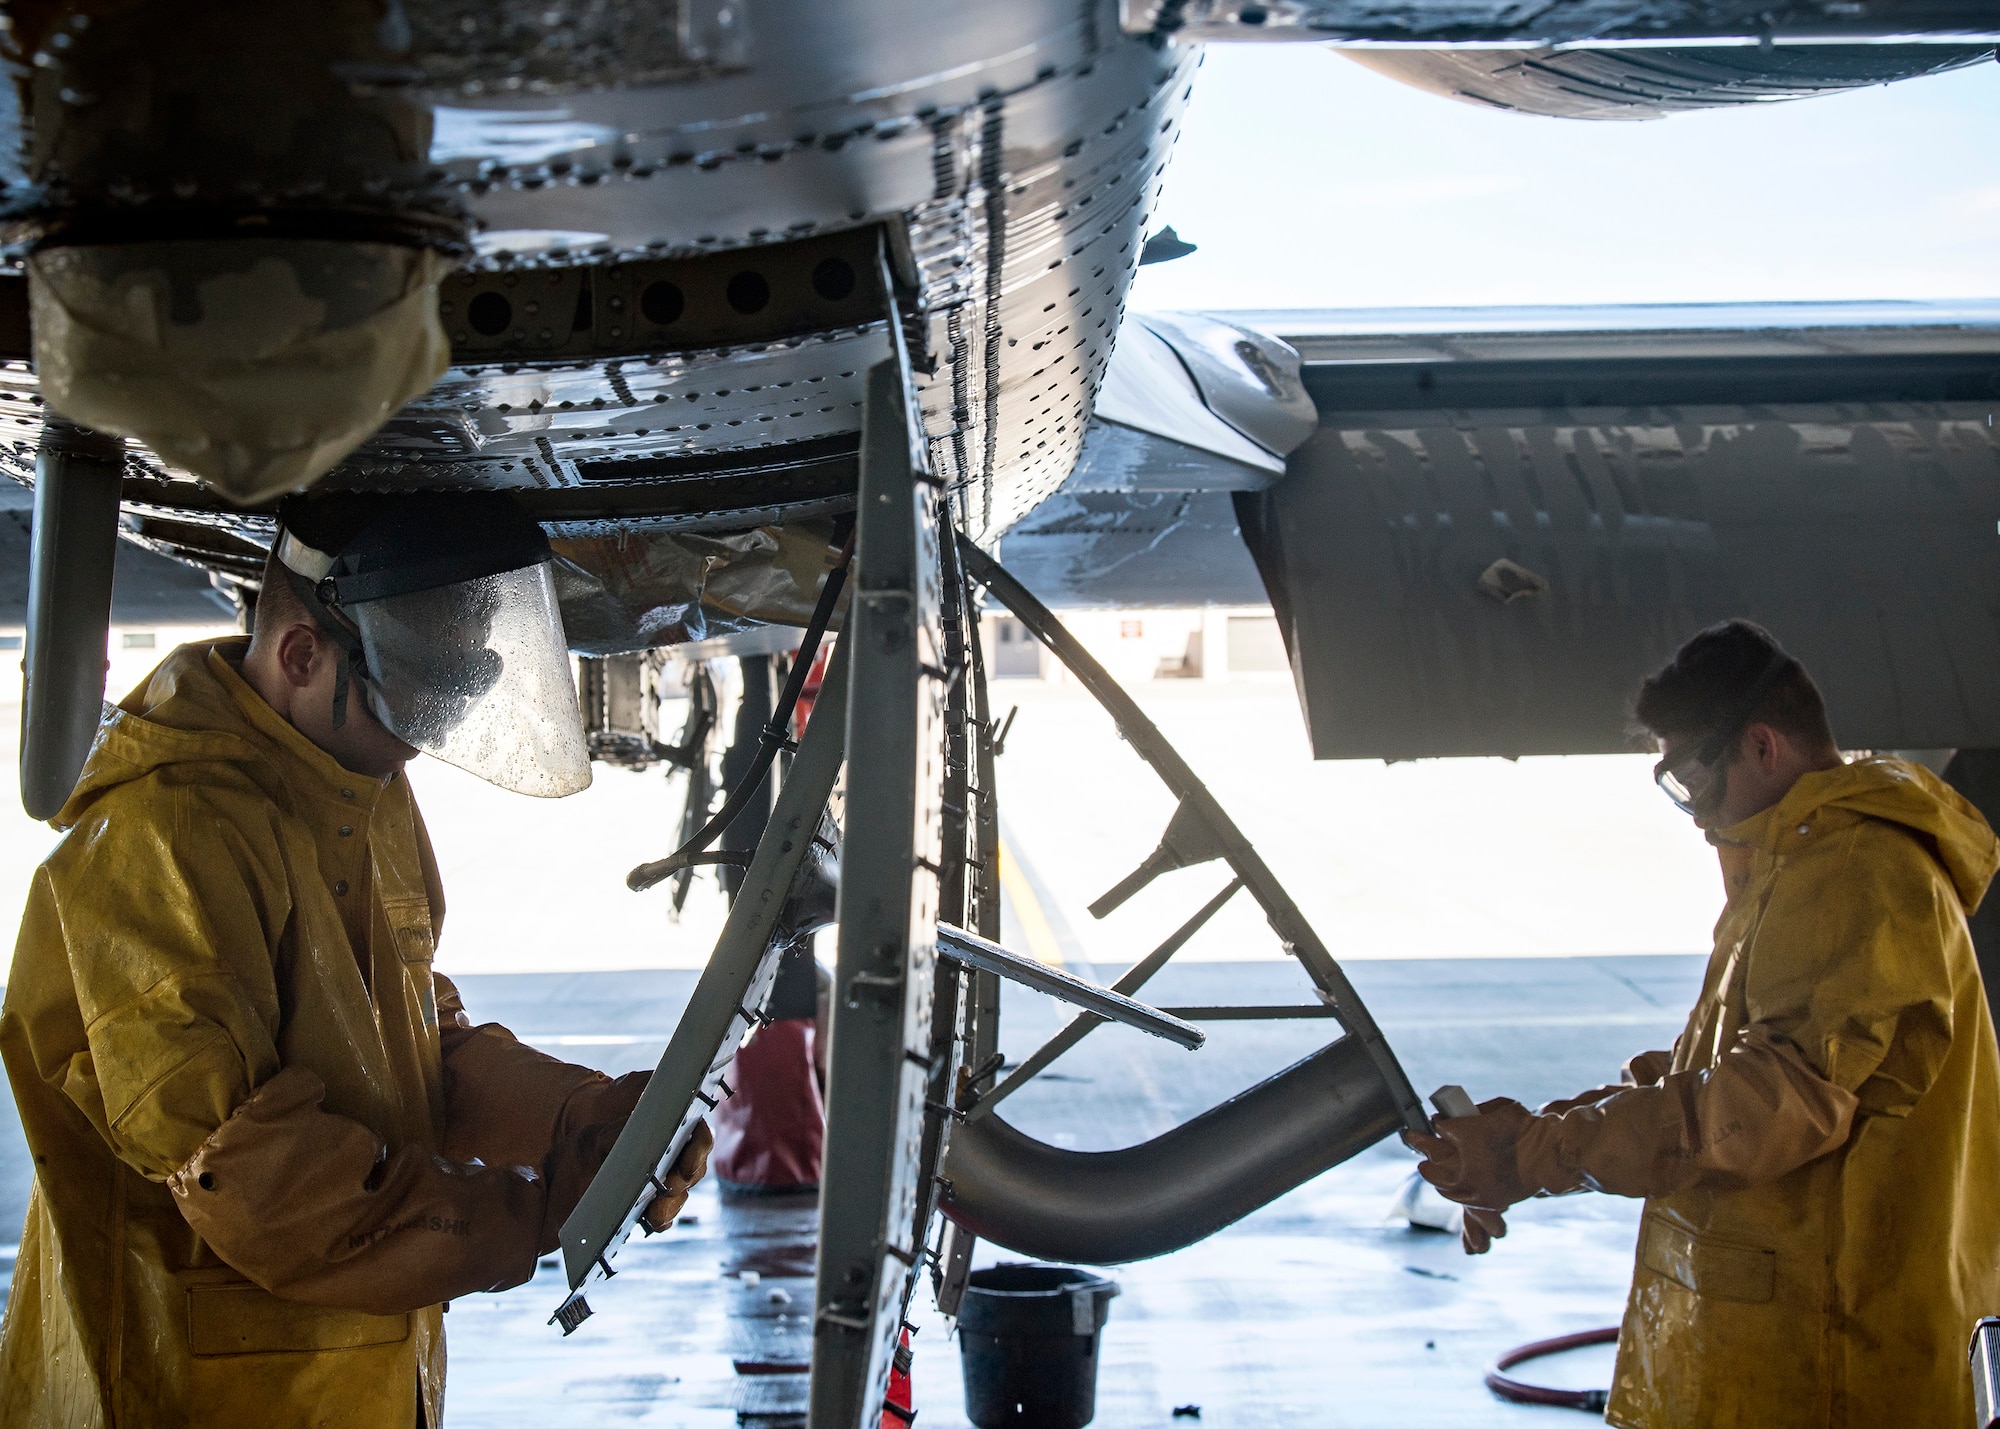 Airman 1st Class Eric Foster, left, and Airman 1st Class Hector Ramirez-Borbon, 74th Aircraft Maintenance Unit crew chiefs, clean components of an A-10C Thunderbolt II, Feb. 25, 2019, at Moody Air Force, Ga. To guarantee Moody’s fleet of 49 A-10s are in peak warfighting condition, Airmen from the 23d Maintenance Group dedicated over 10 hours washing an A-10 to ensure the aircraft is free of any surface or structural deficiencies that could present a safety hazard during flight. (U.S. Air Force photo by Airman 1st Class Eugene Oliver)